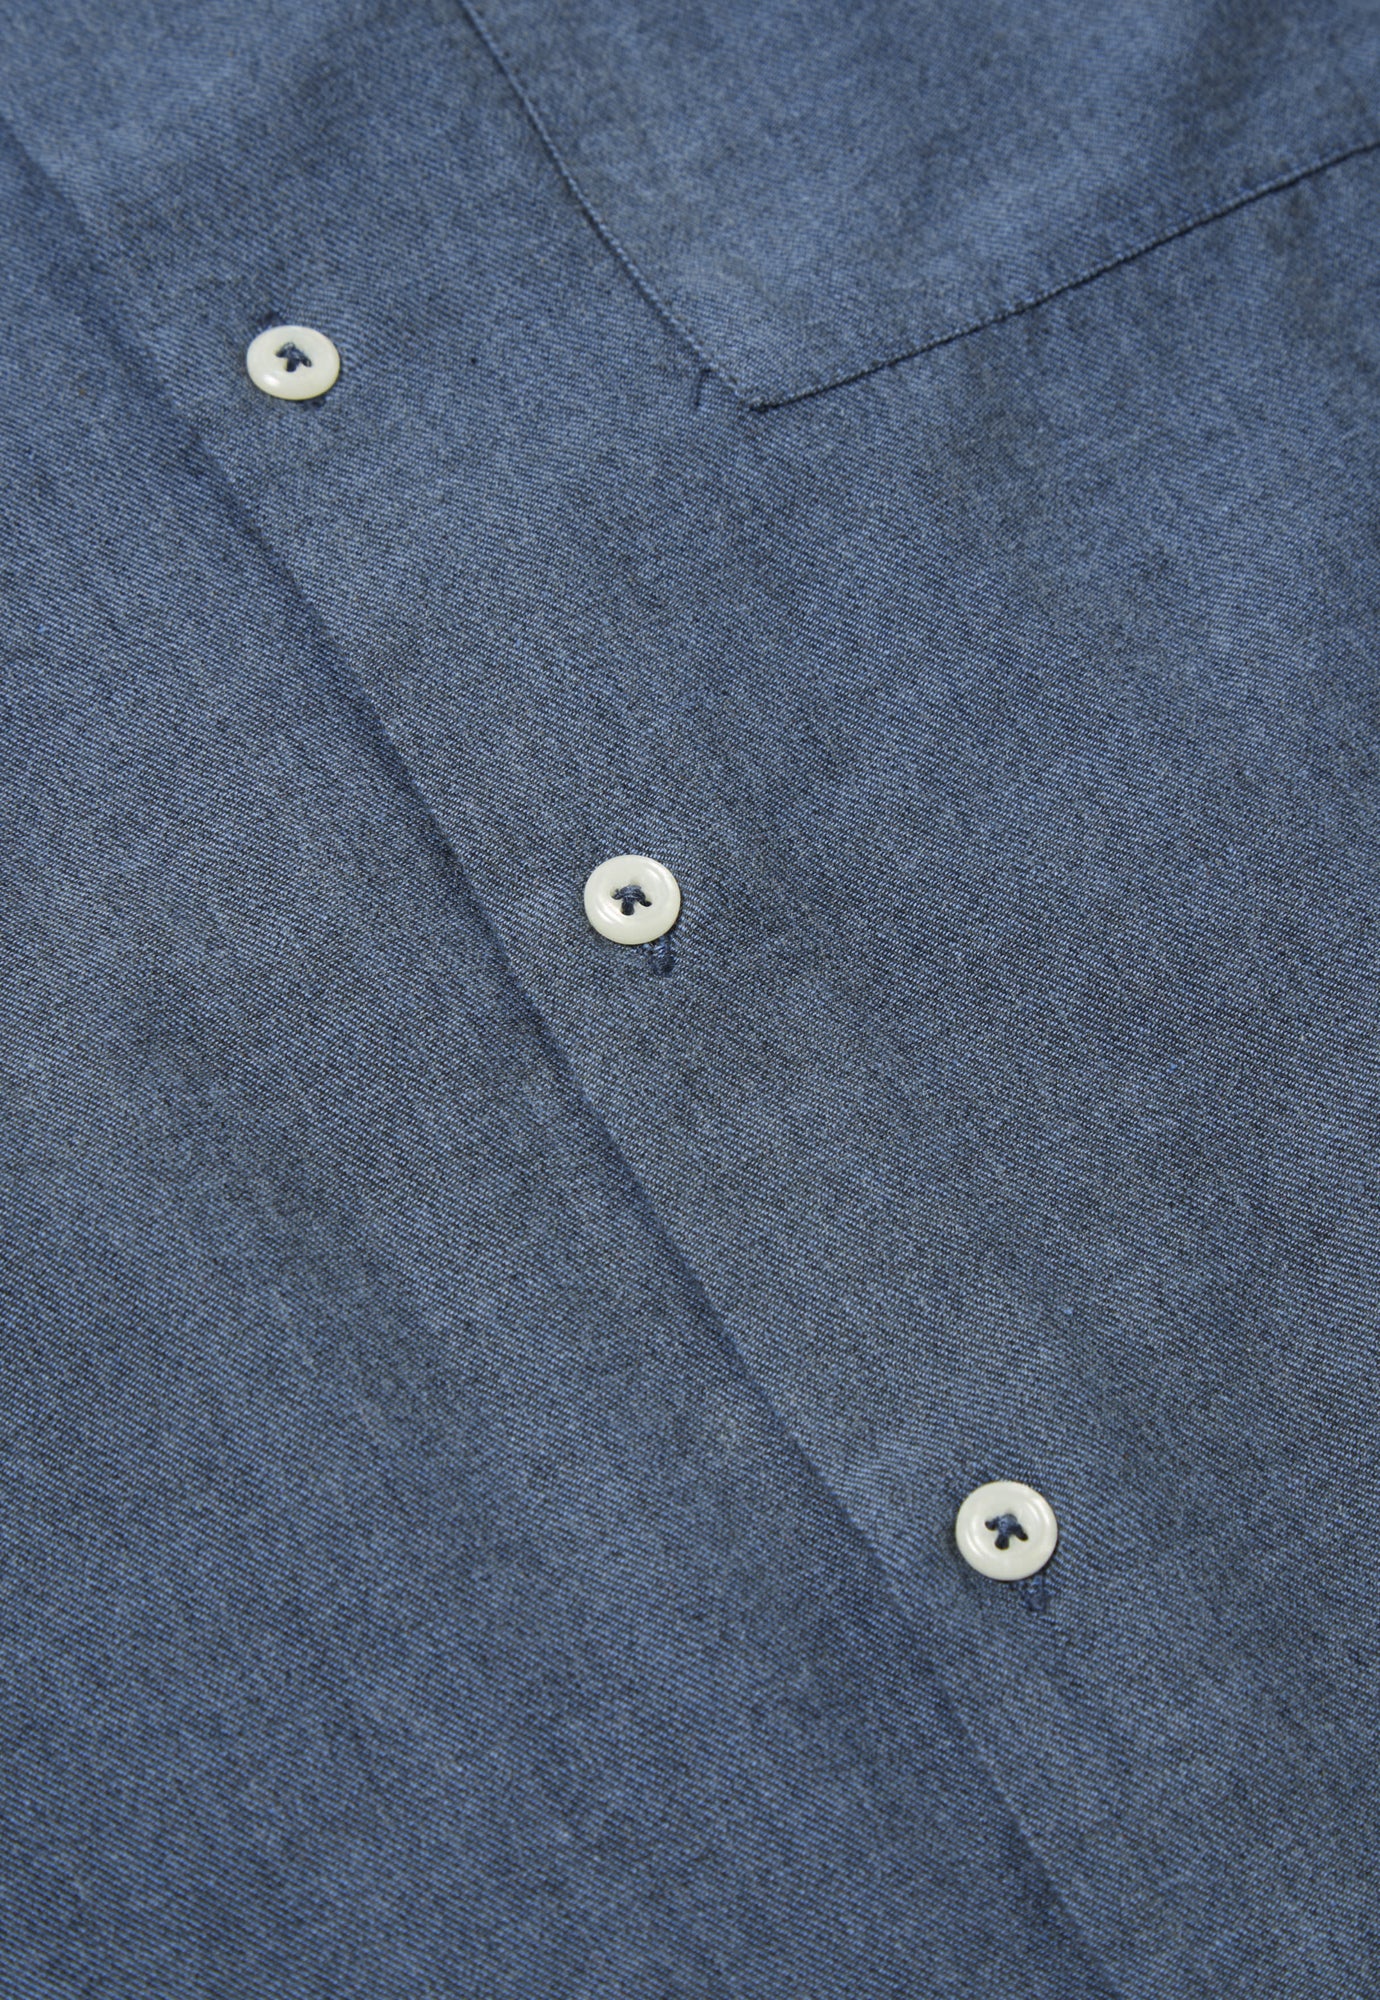 Universal Works Square Pocket Shirt in Blue IT Brushed Twill